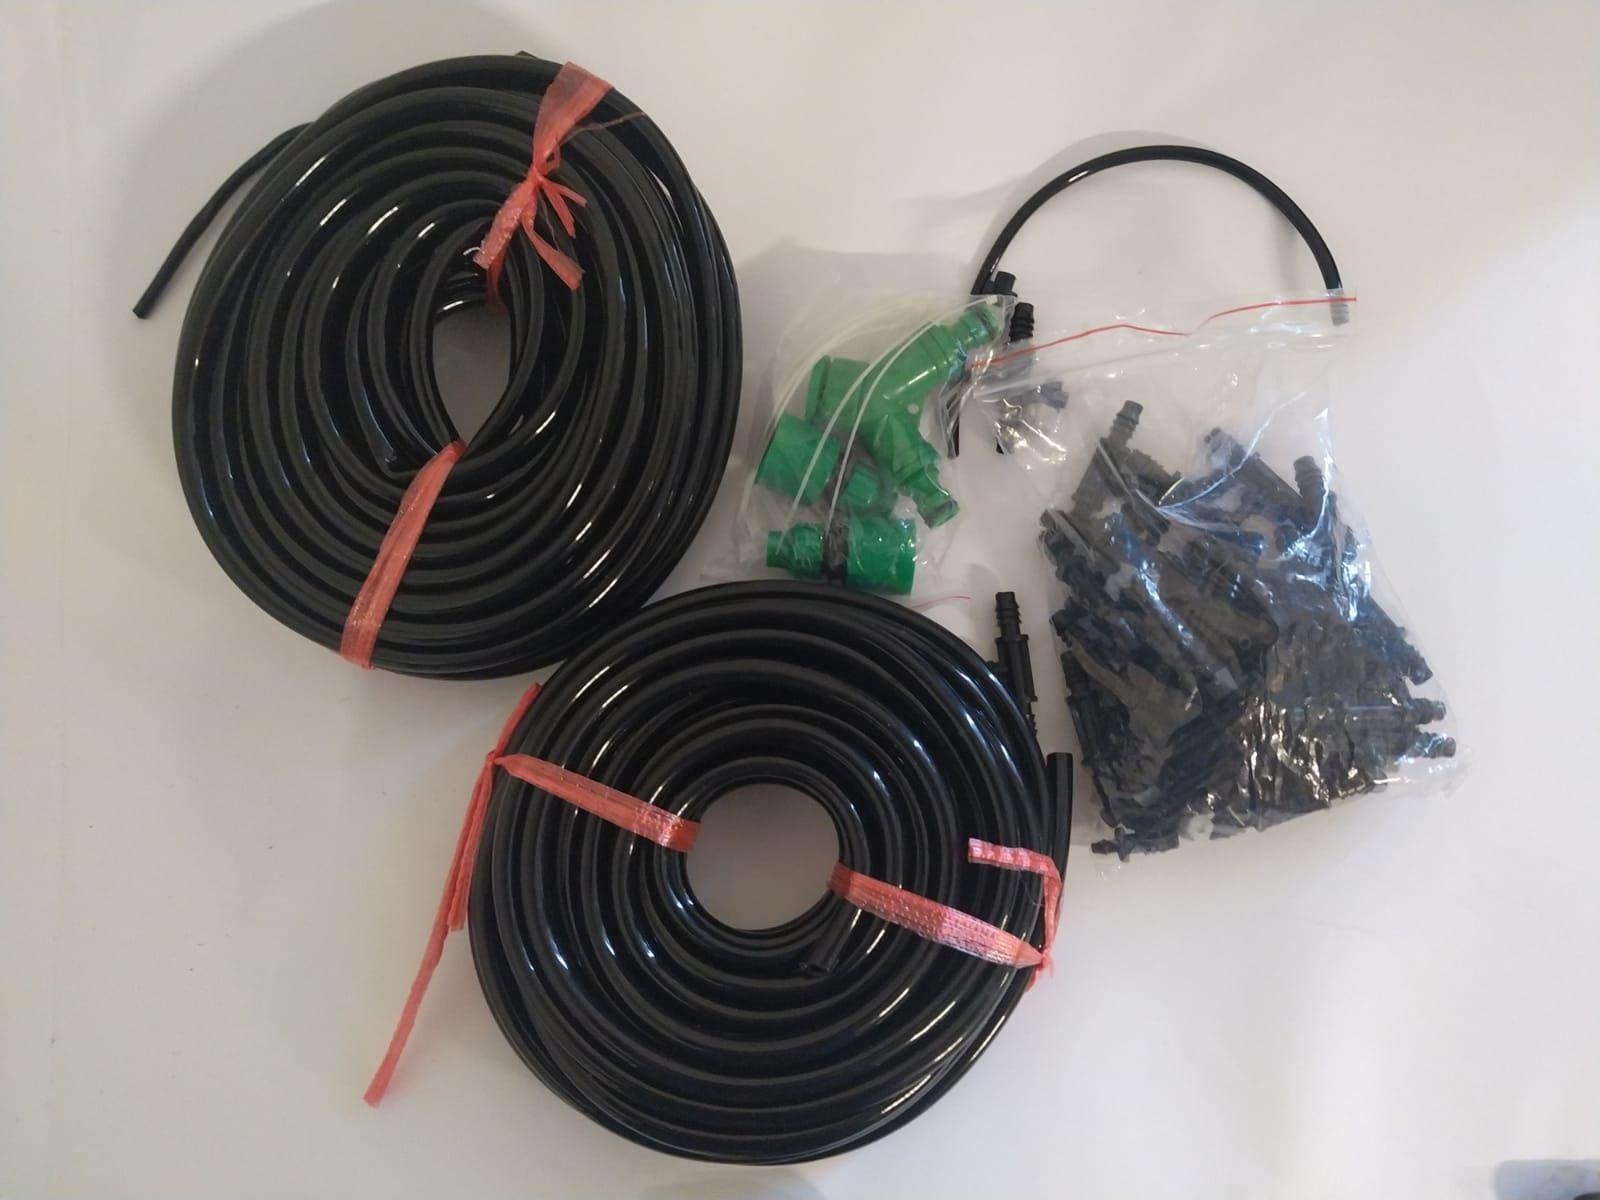 Water curtain set for watering plants - 30 m 30 nozzles